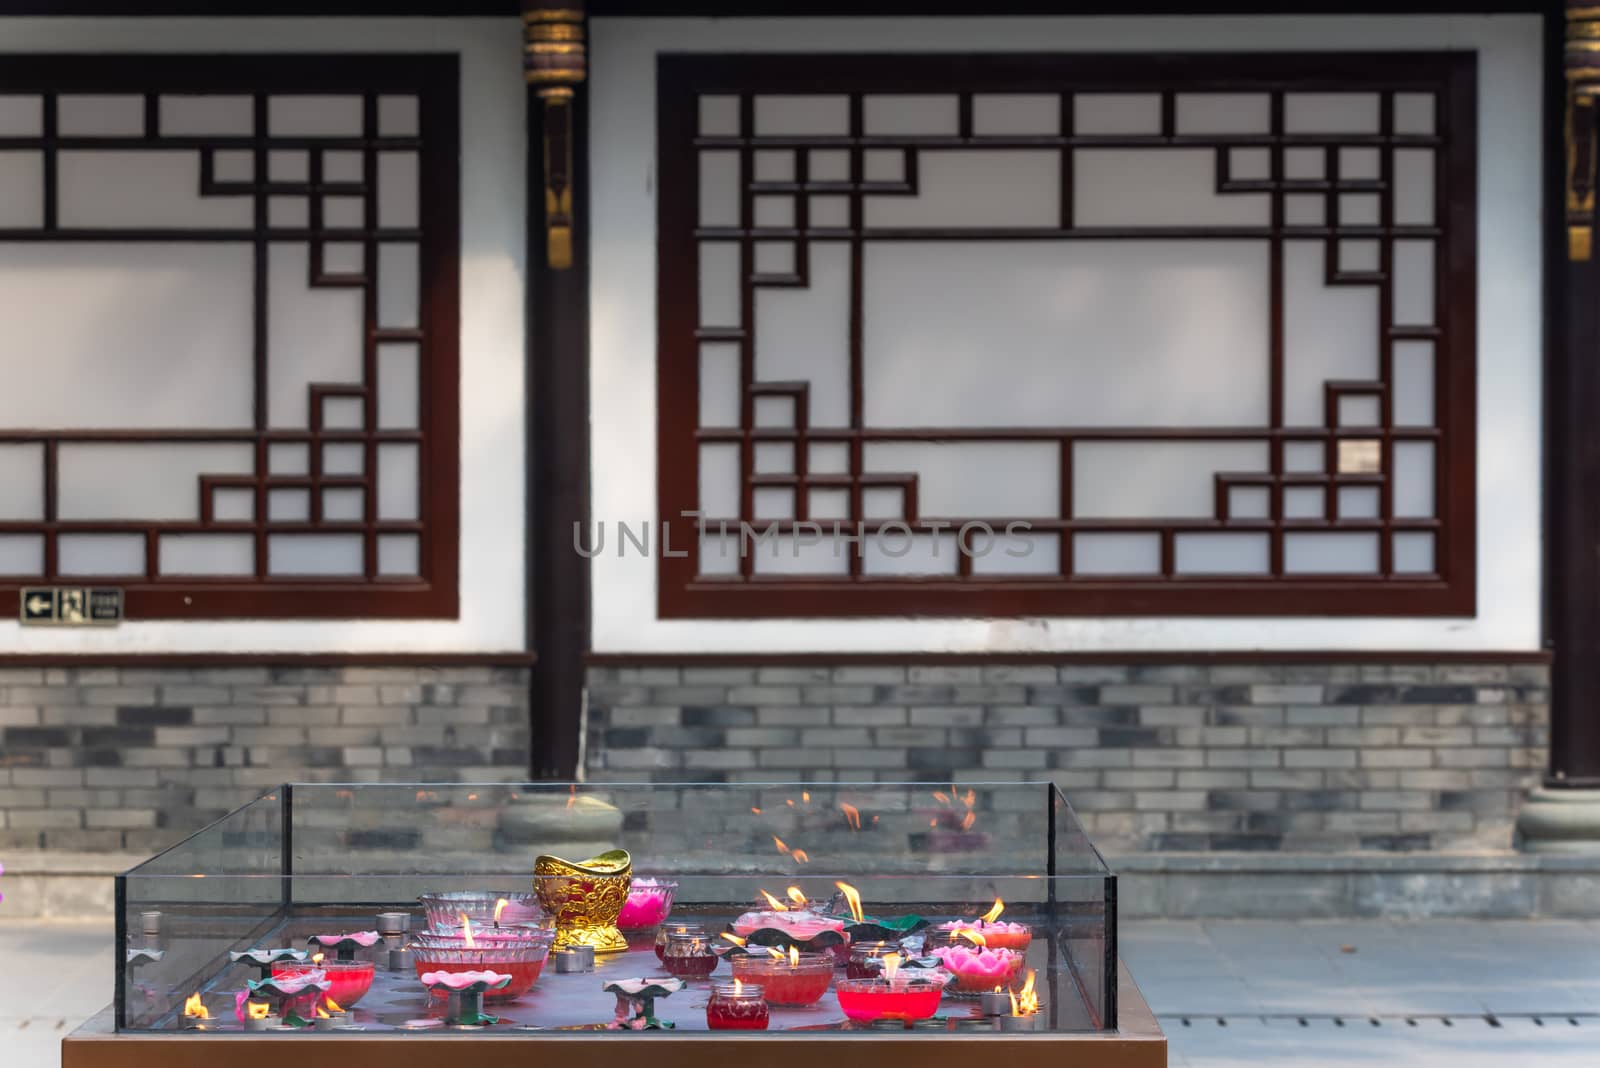 Candles burning in Daci buddhist temple roof against modern building in Chengdu, China